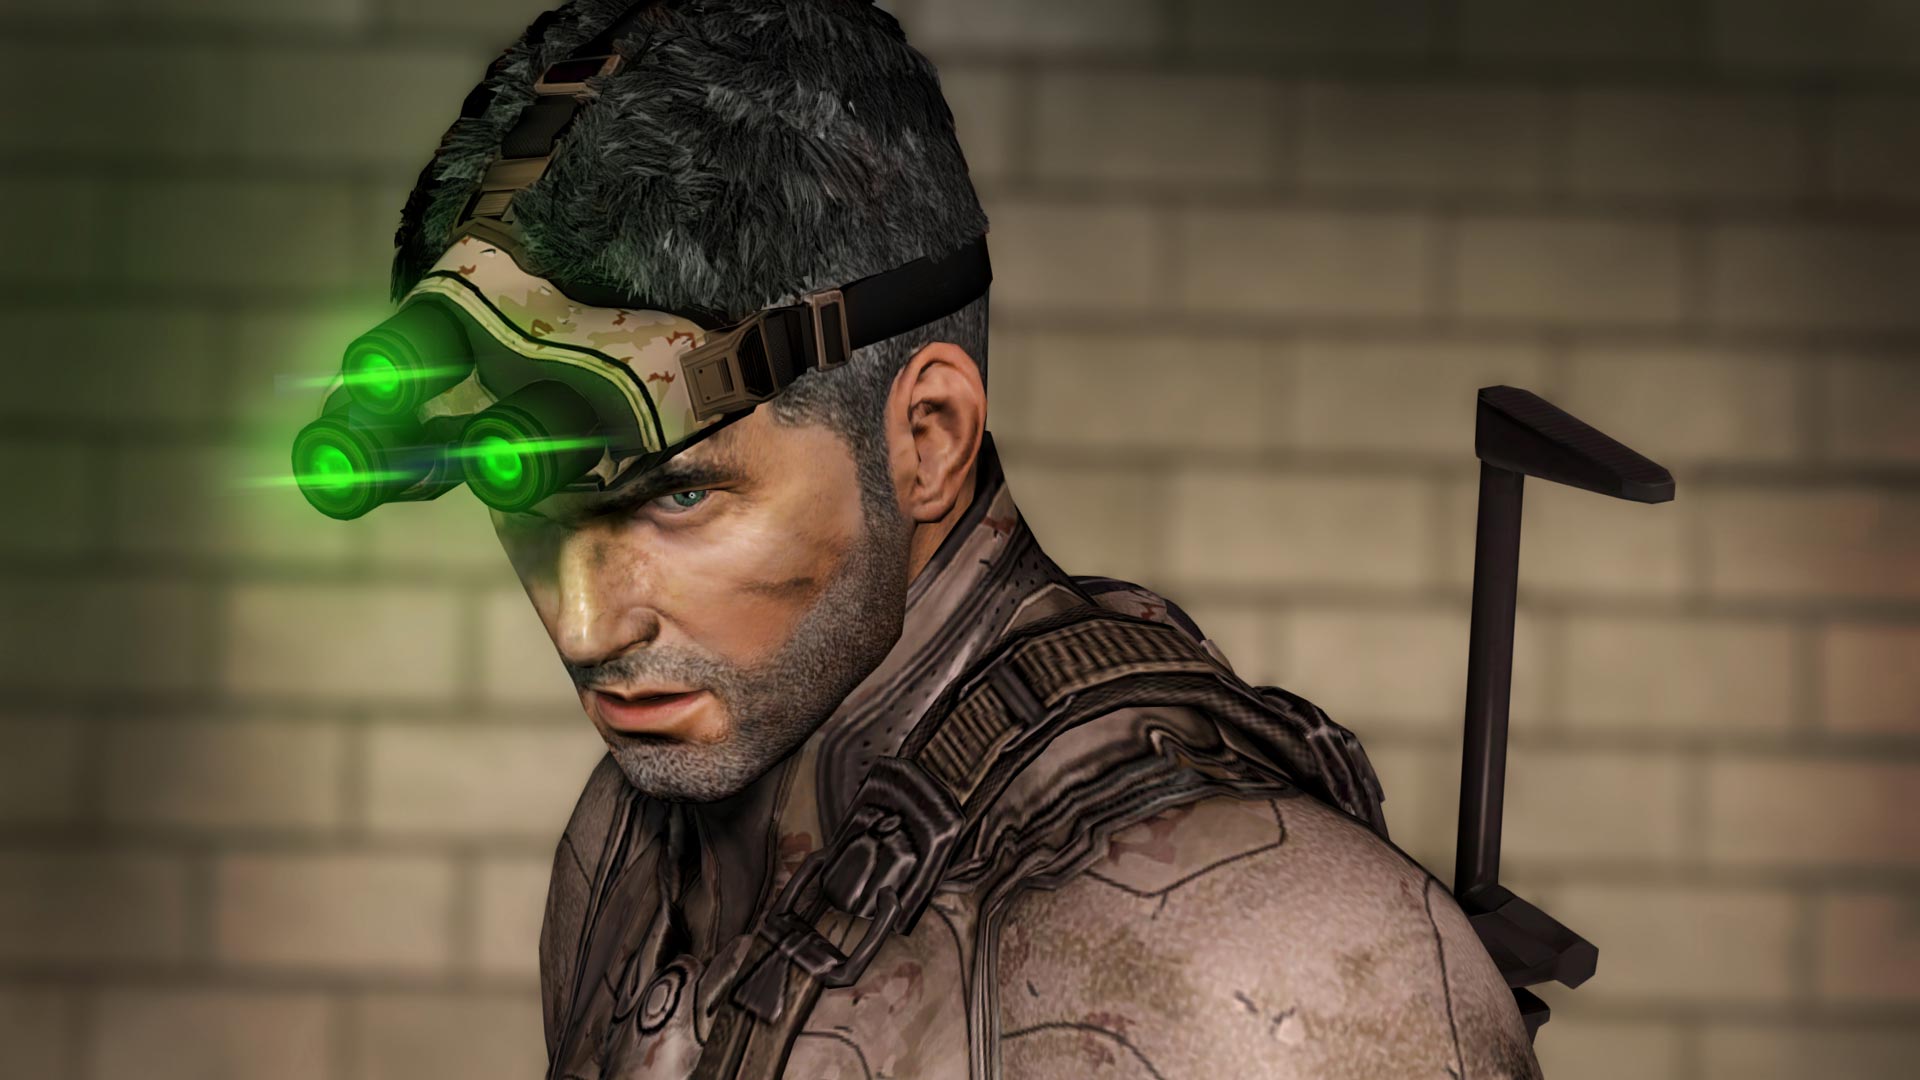 Splinter Cell Remake: Release date, story, gameplay and more